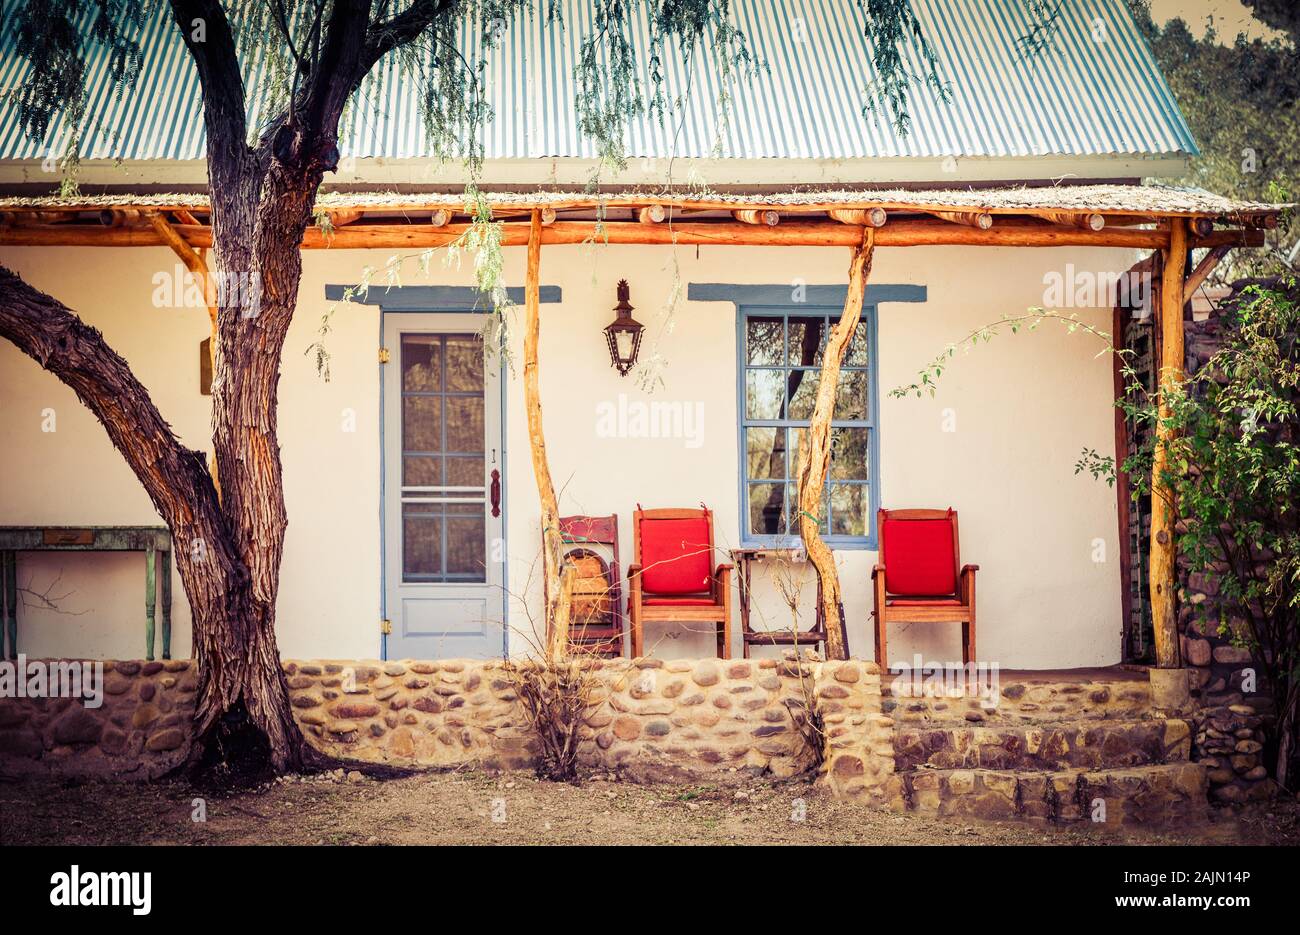 A Mesquite tree near the pole and tree post porch of a Spanish influenced adobe home with red chairs on porch in artisan town of Tubac, AZ, USA Stock Photo